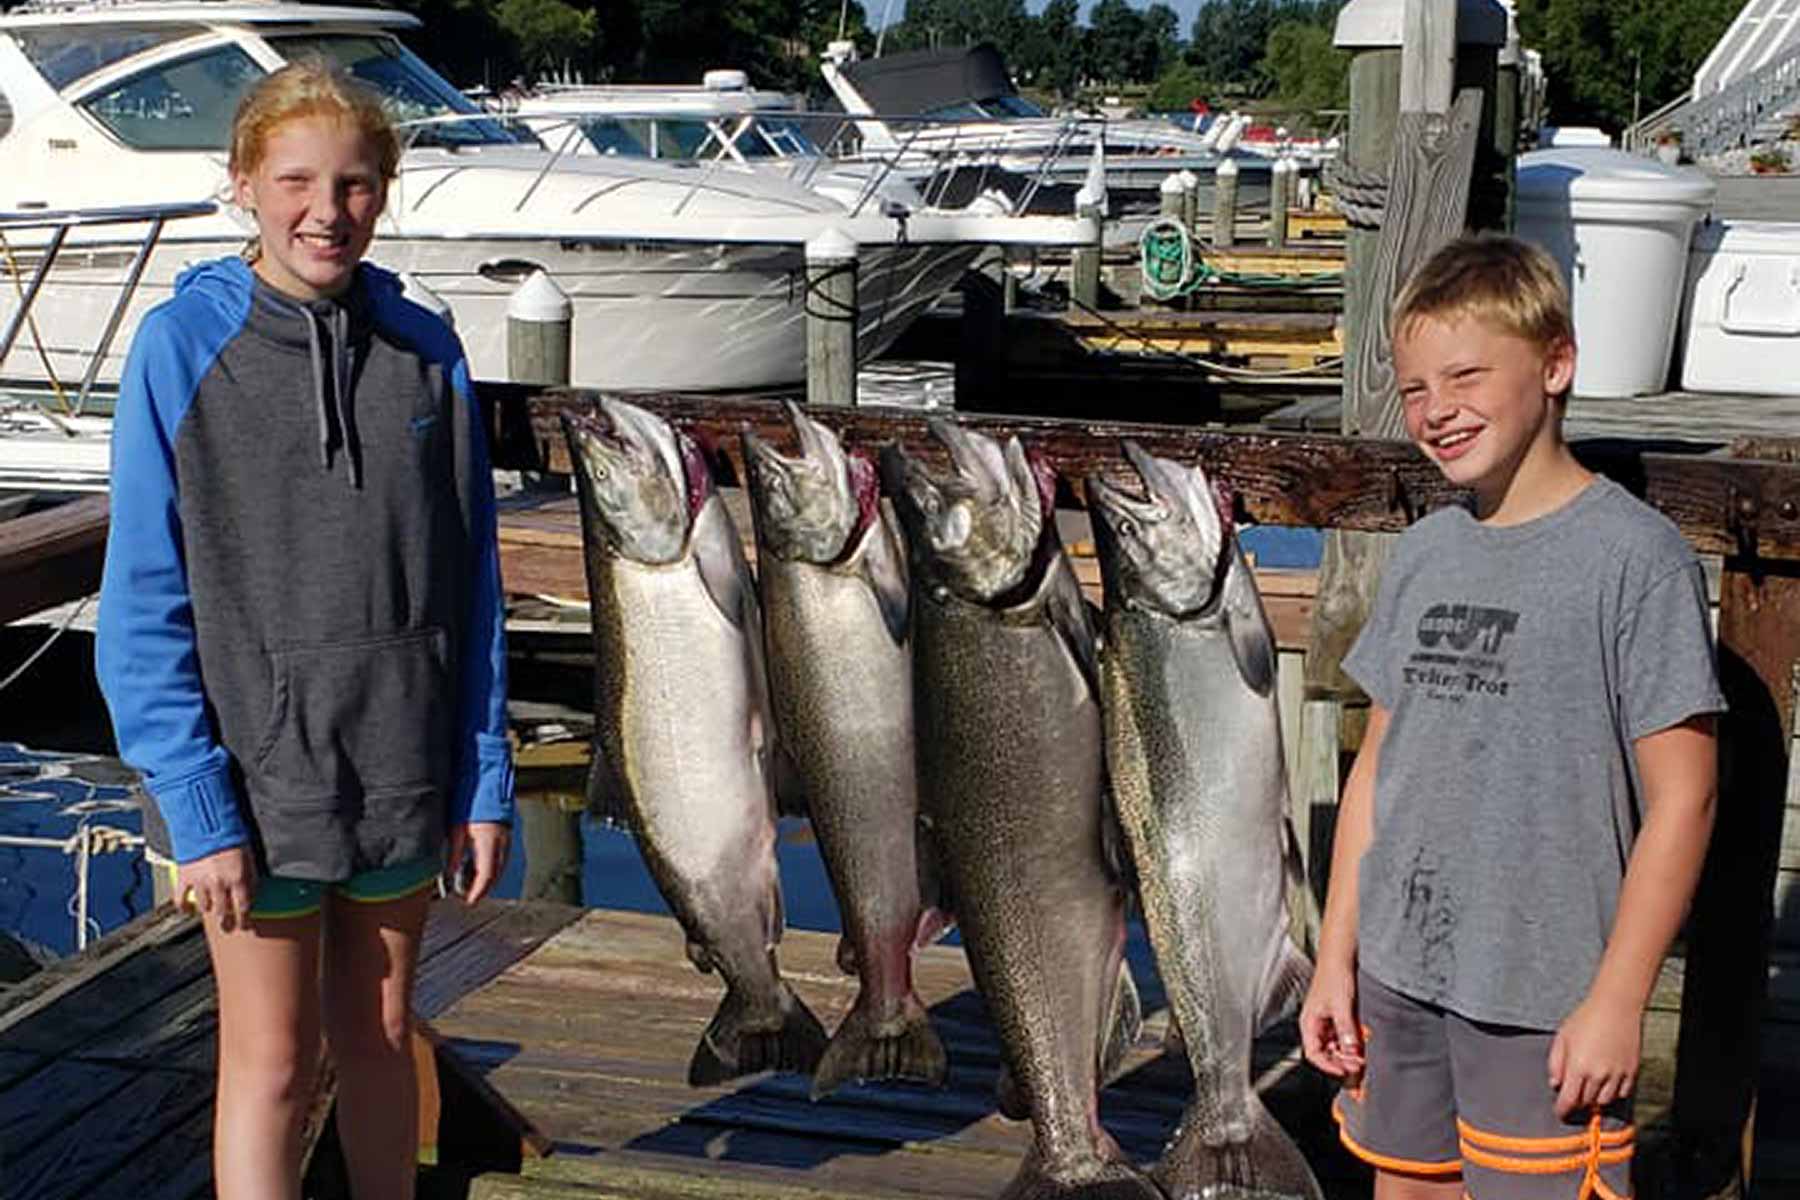 family friendly fishing - introducing kids to fishing